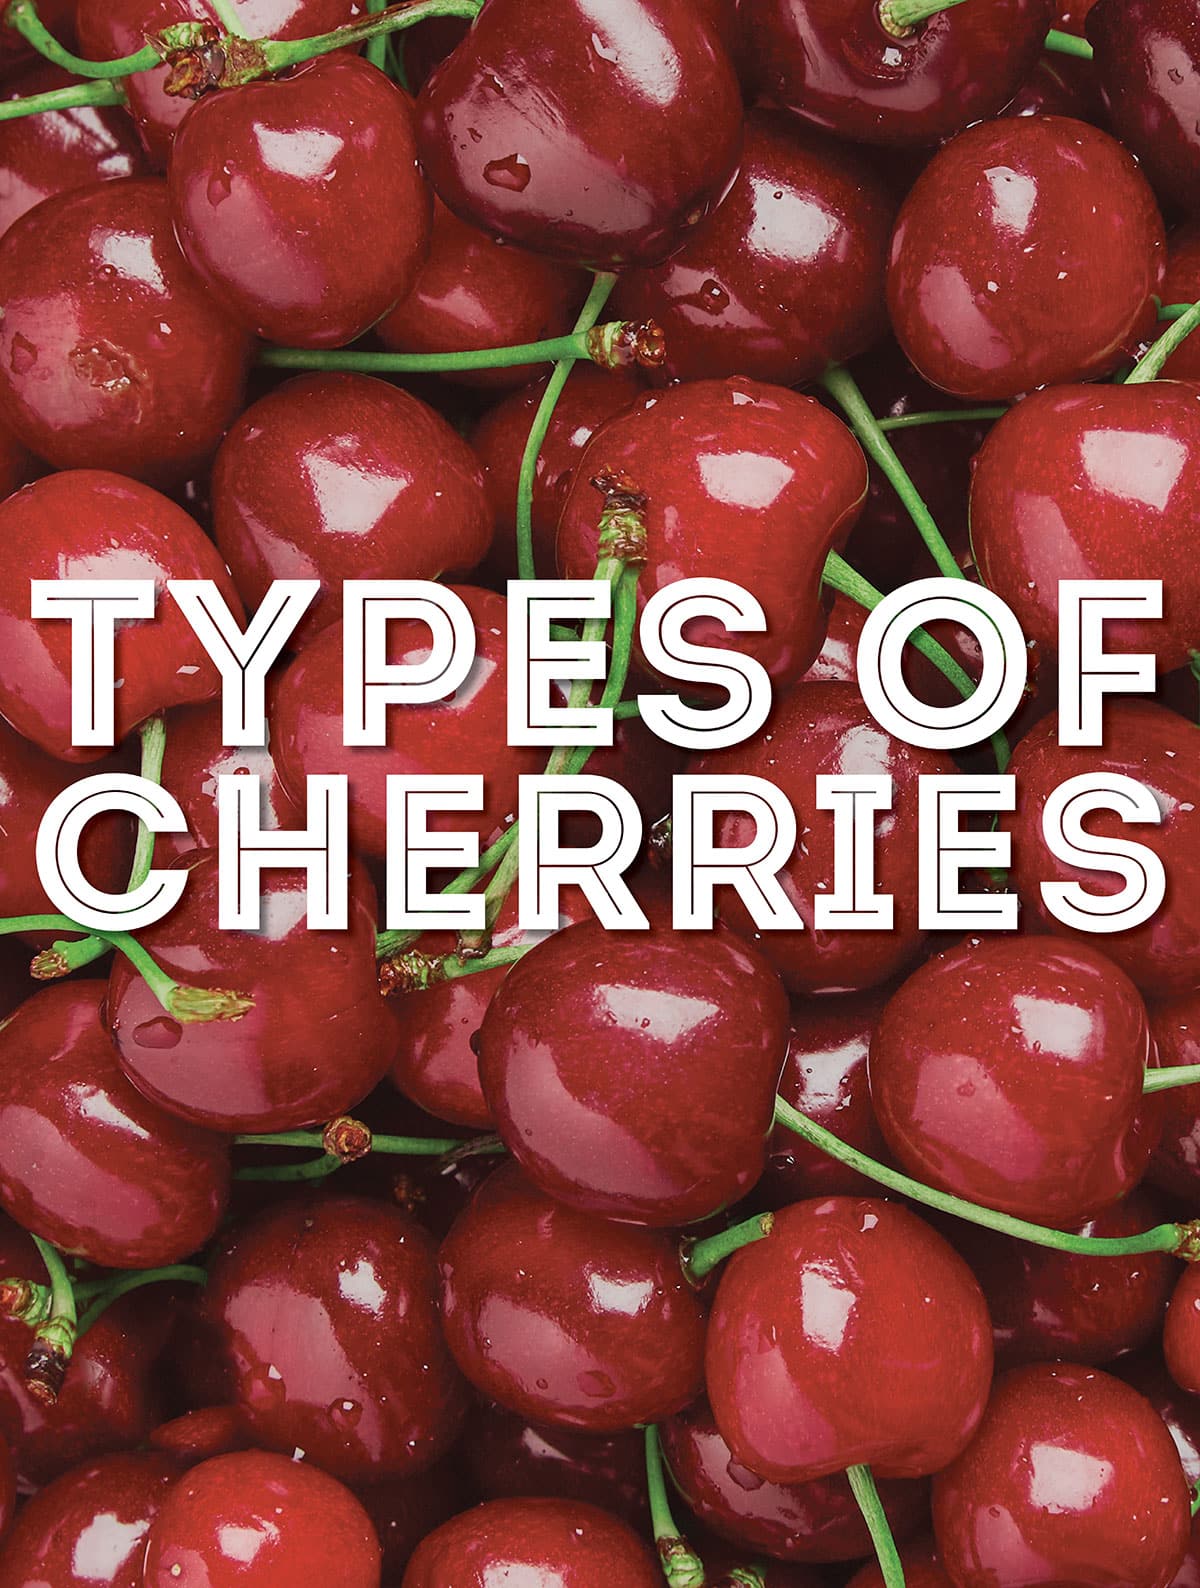 Collage called "types of cherries".